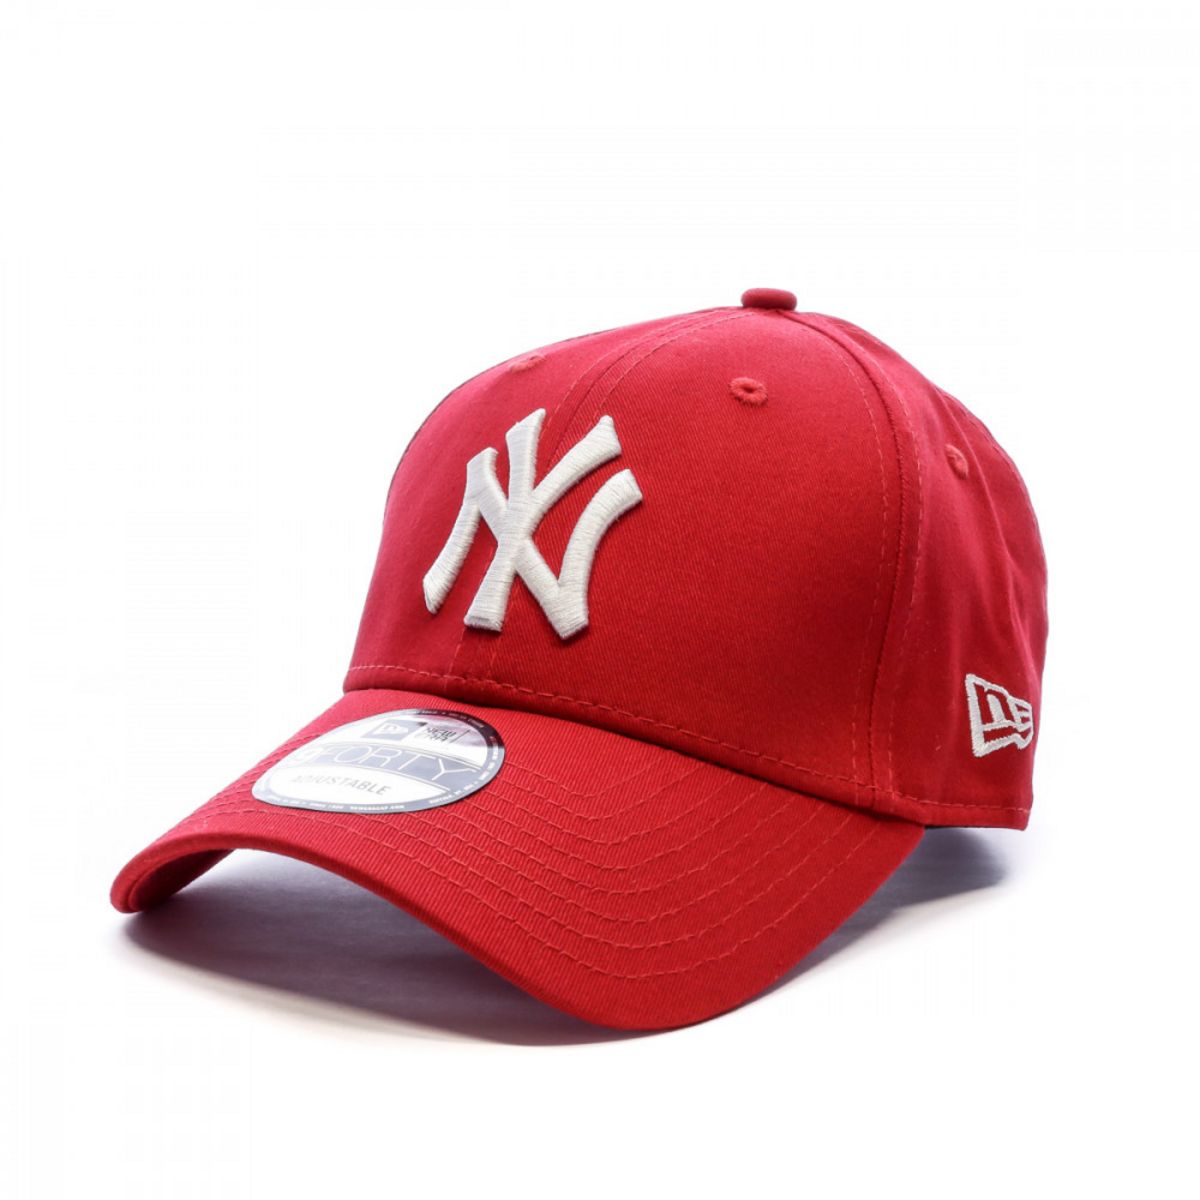 Casquette new york rouge homme